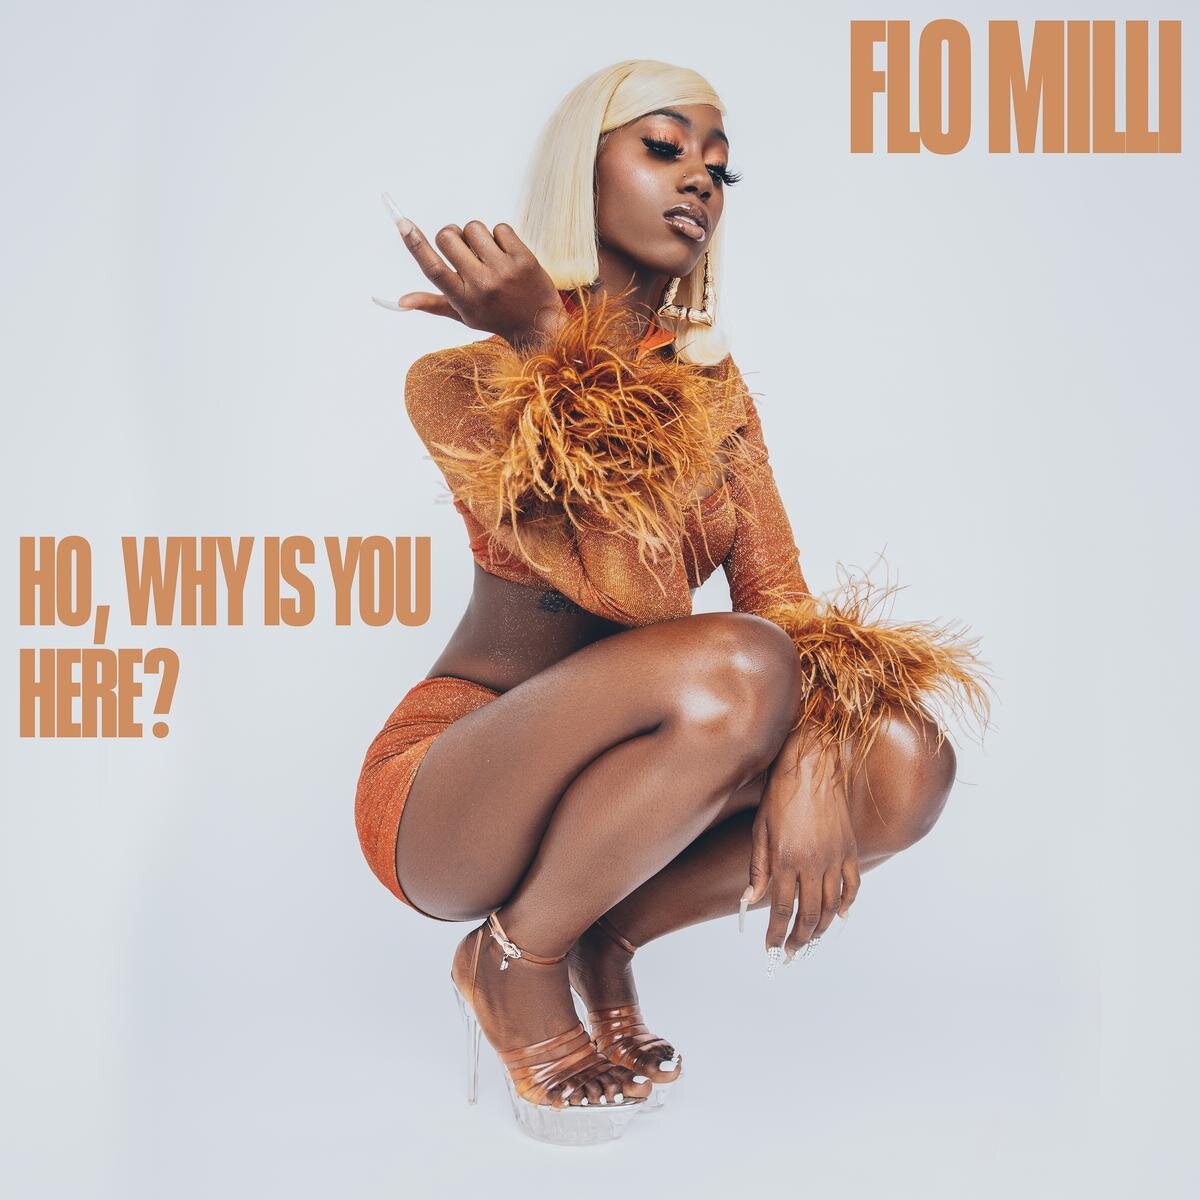 Ho, Why Is You Here? by Flo Milli